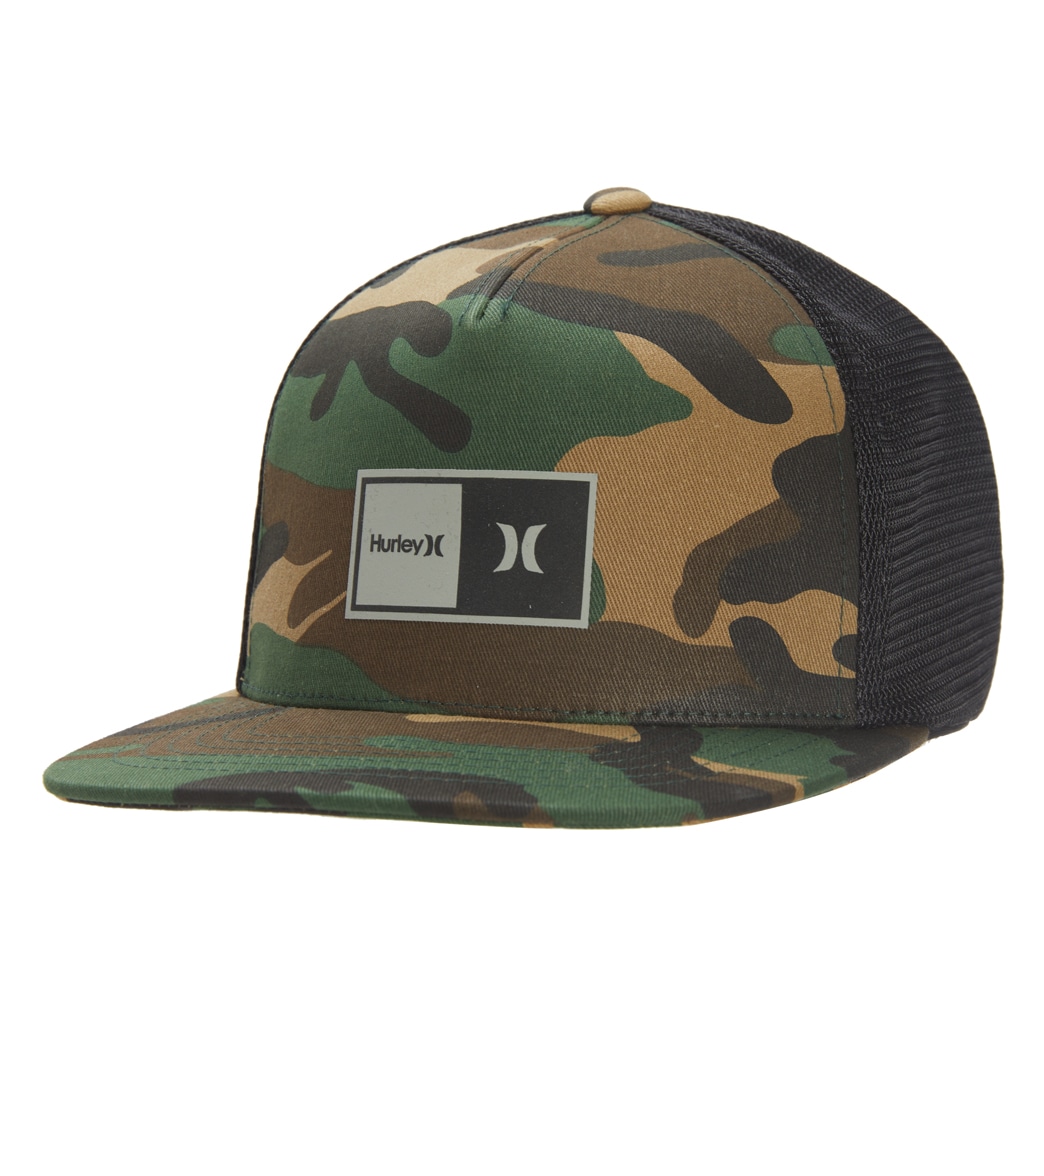 Hurley Natural 2.0 Trucker Hat - Camo One Size - Swimoutlet.com